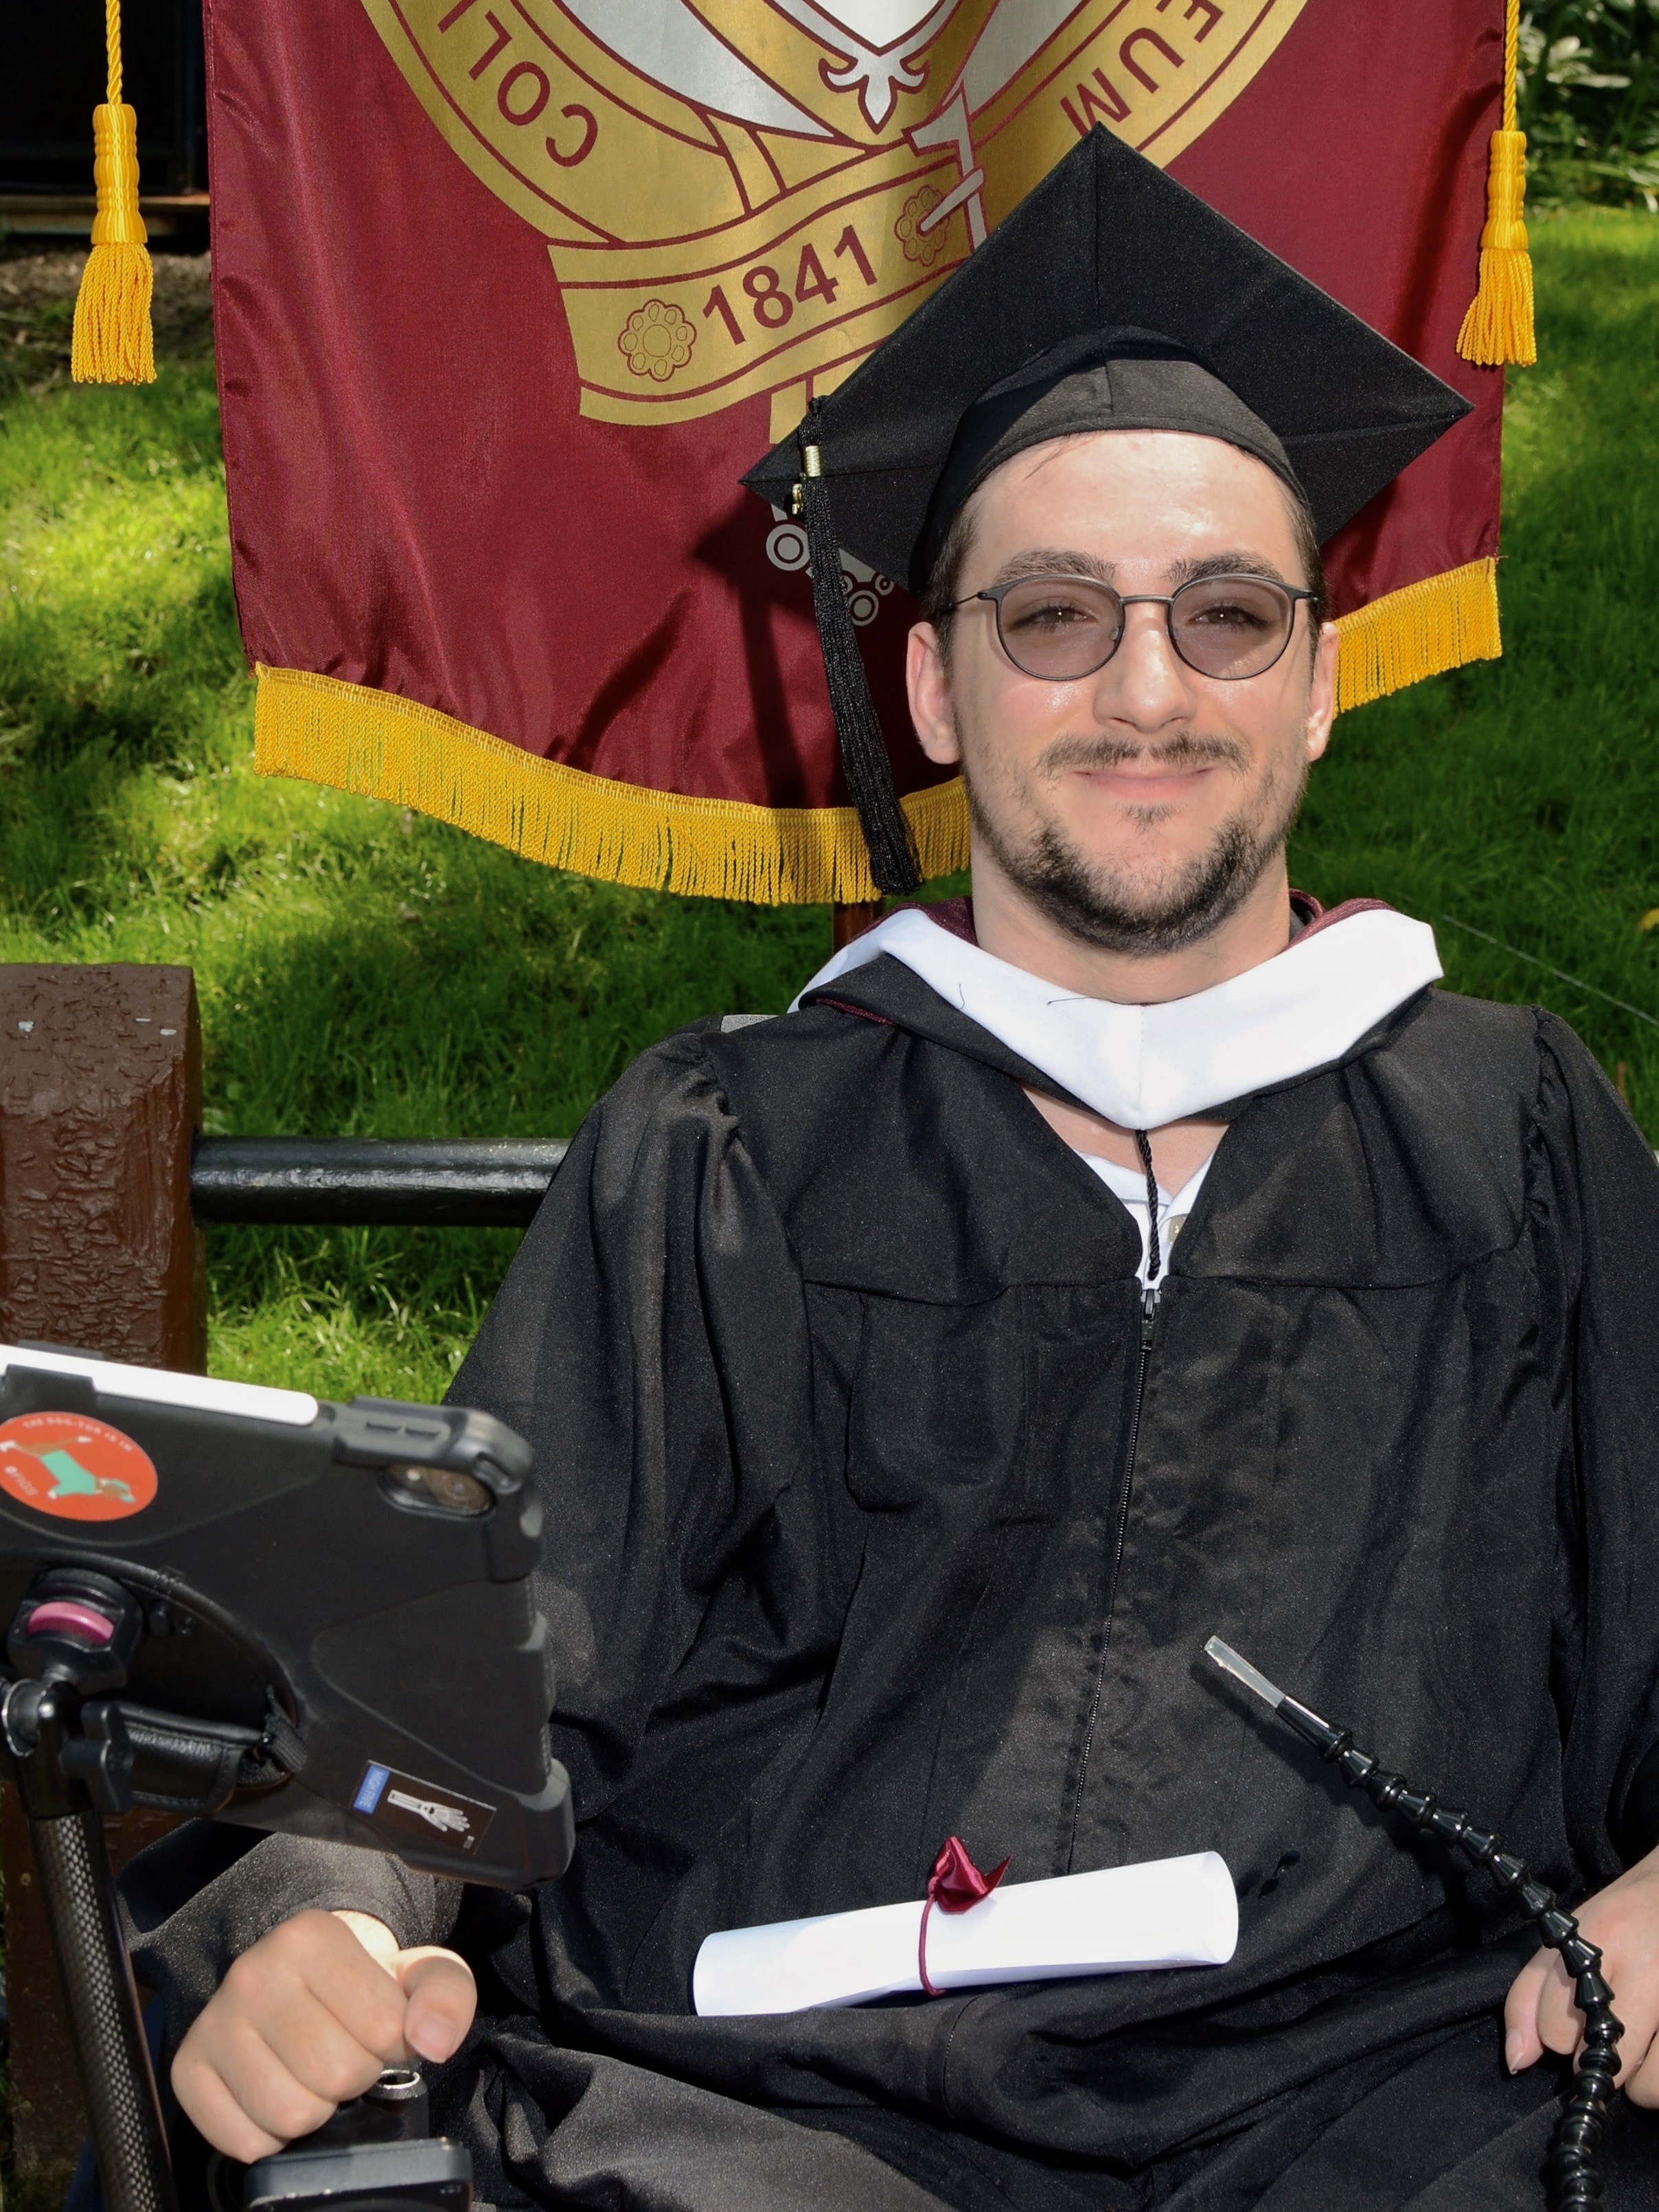 A man wearing sunglasses and a black graduation cap and gown smiles.